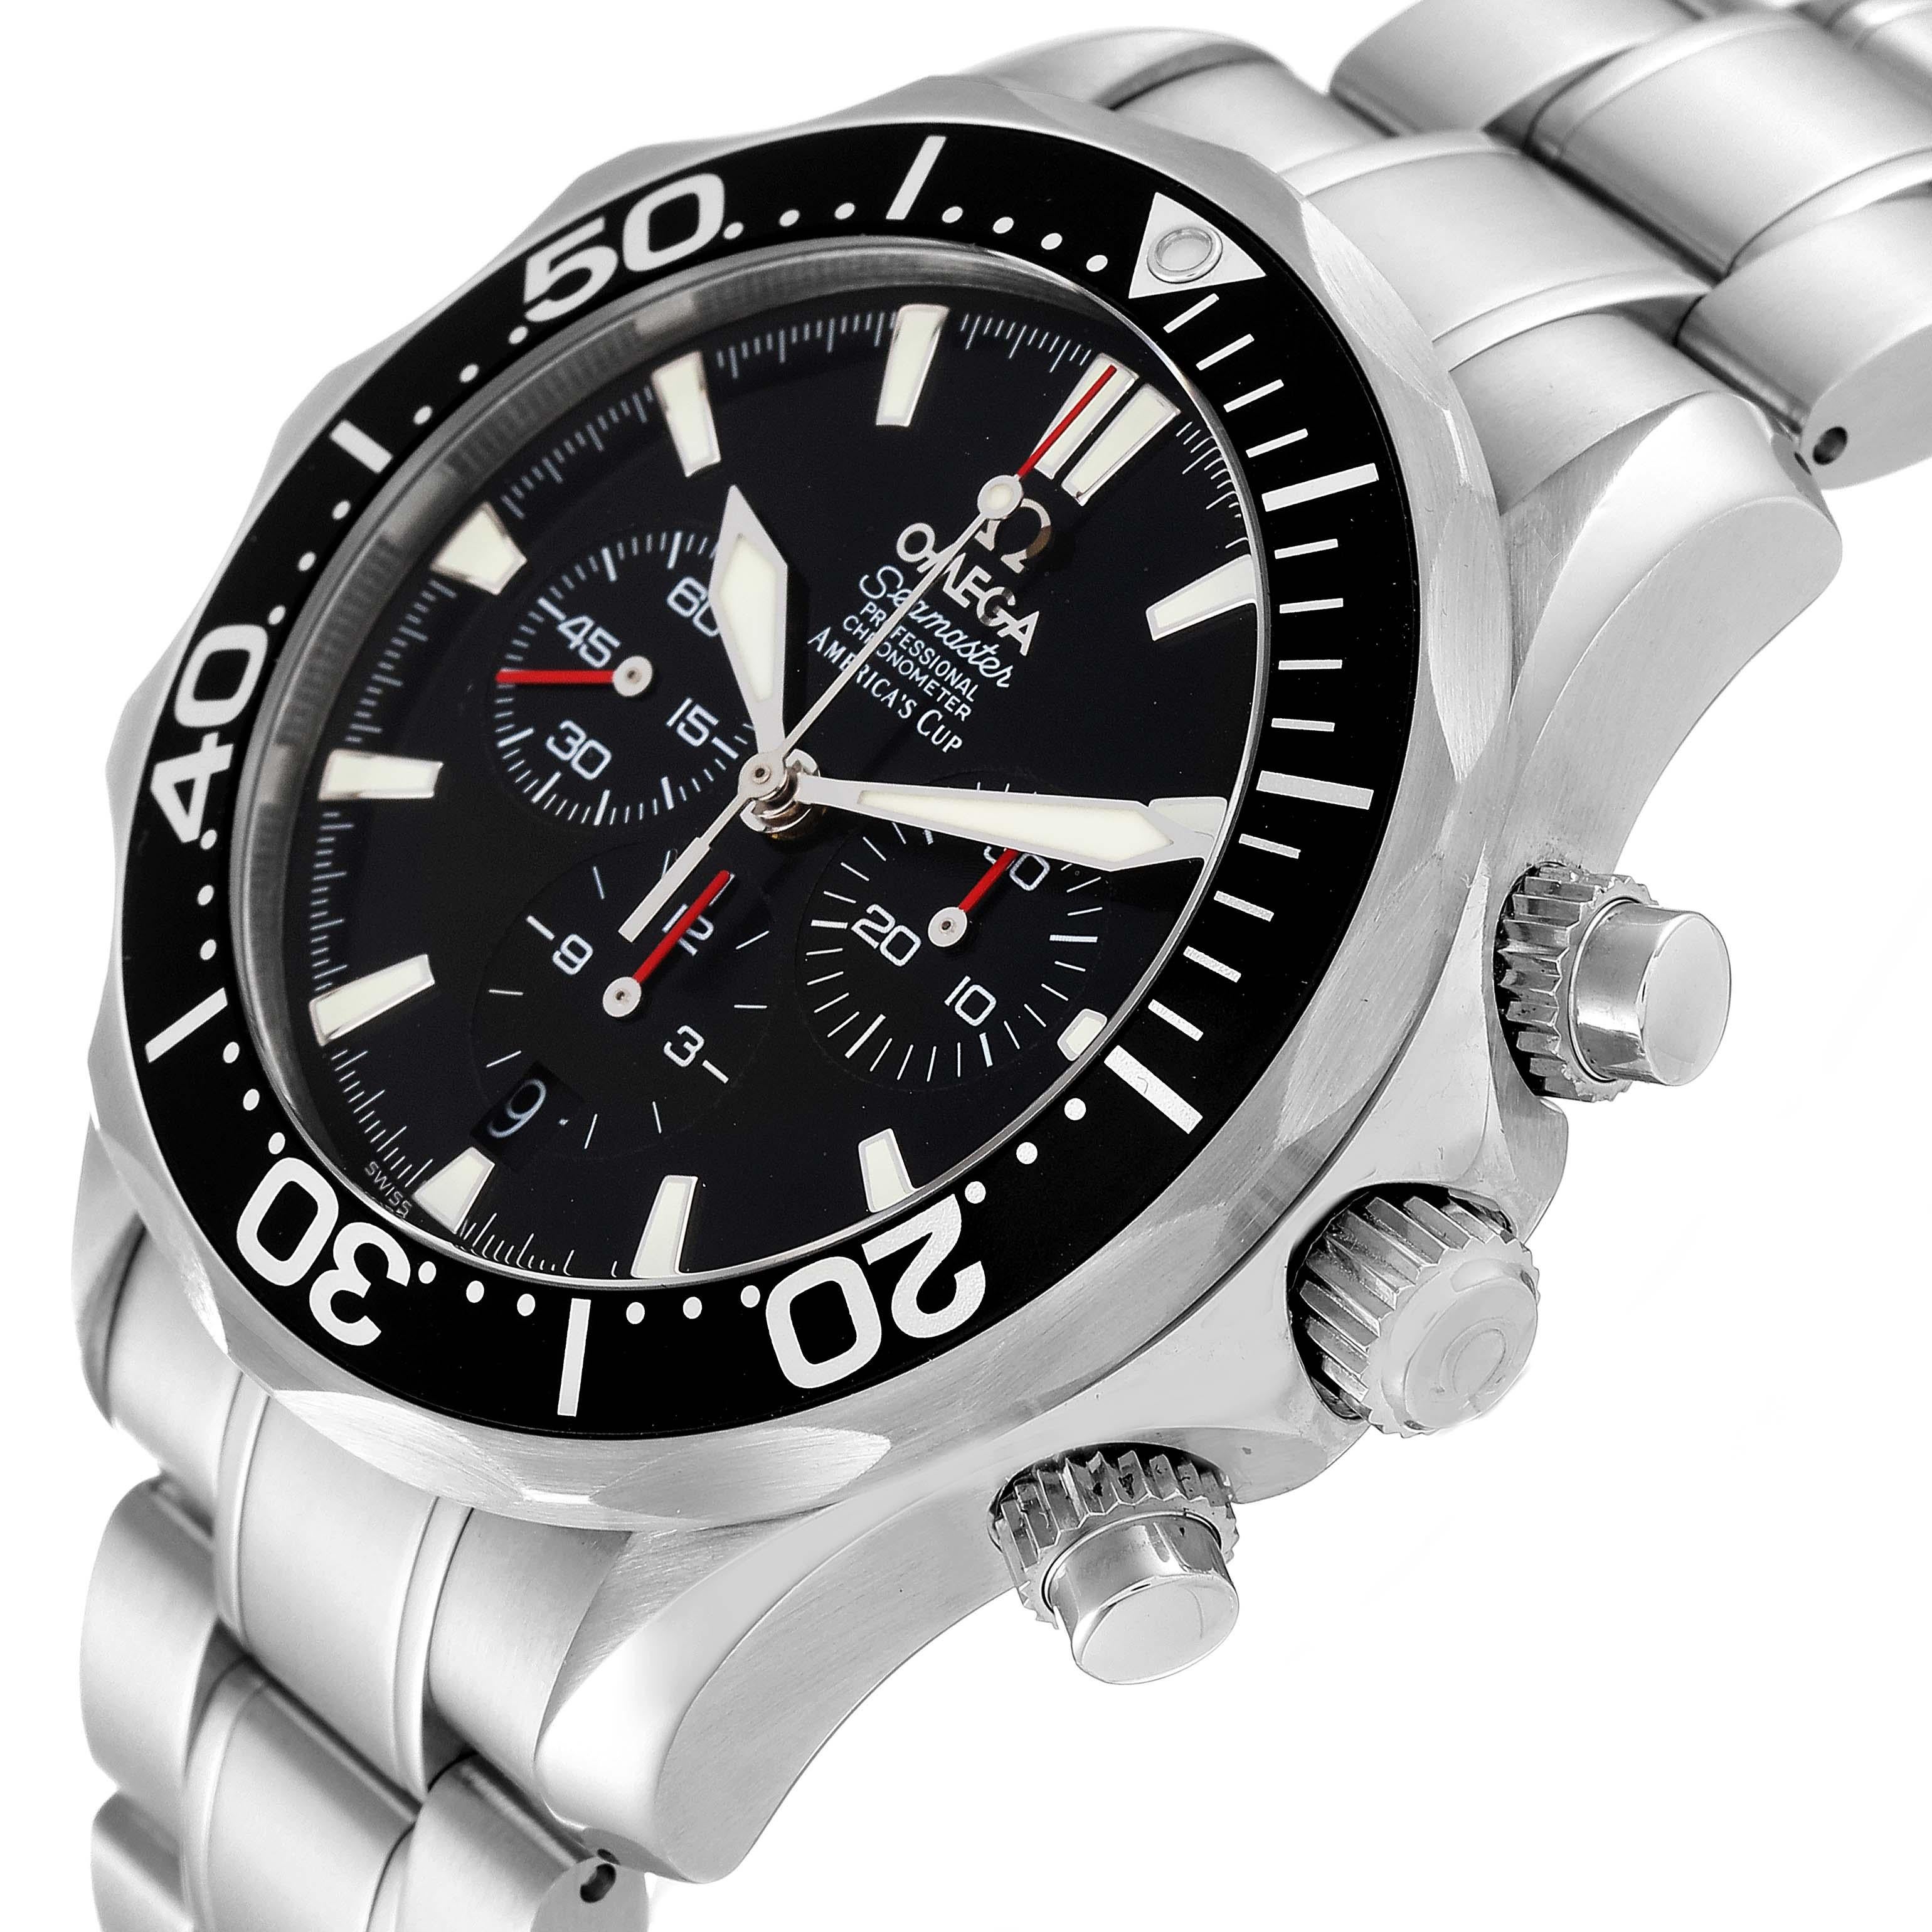 Men's Omega Seamaster 300M Chronograph Americas Cup Mens Watch 2594.50.00